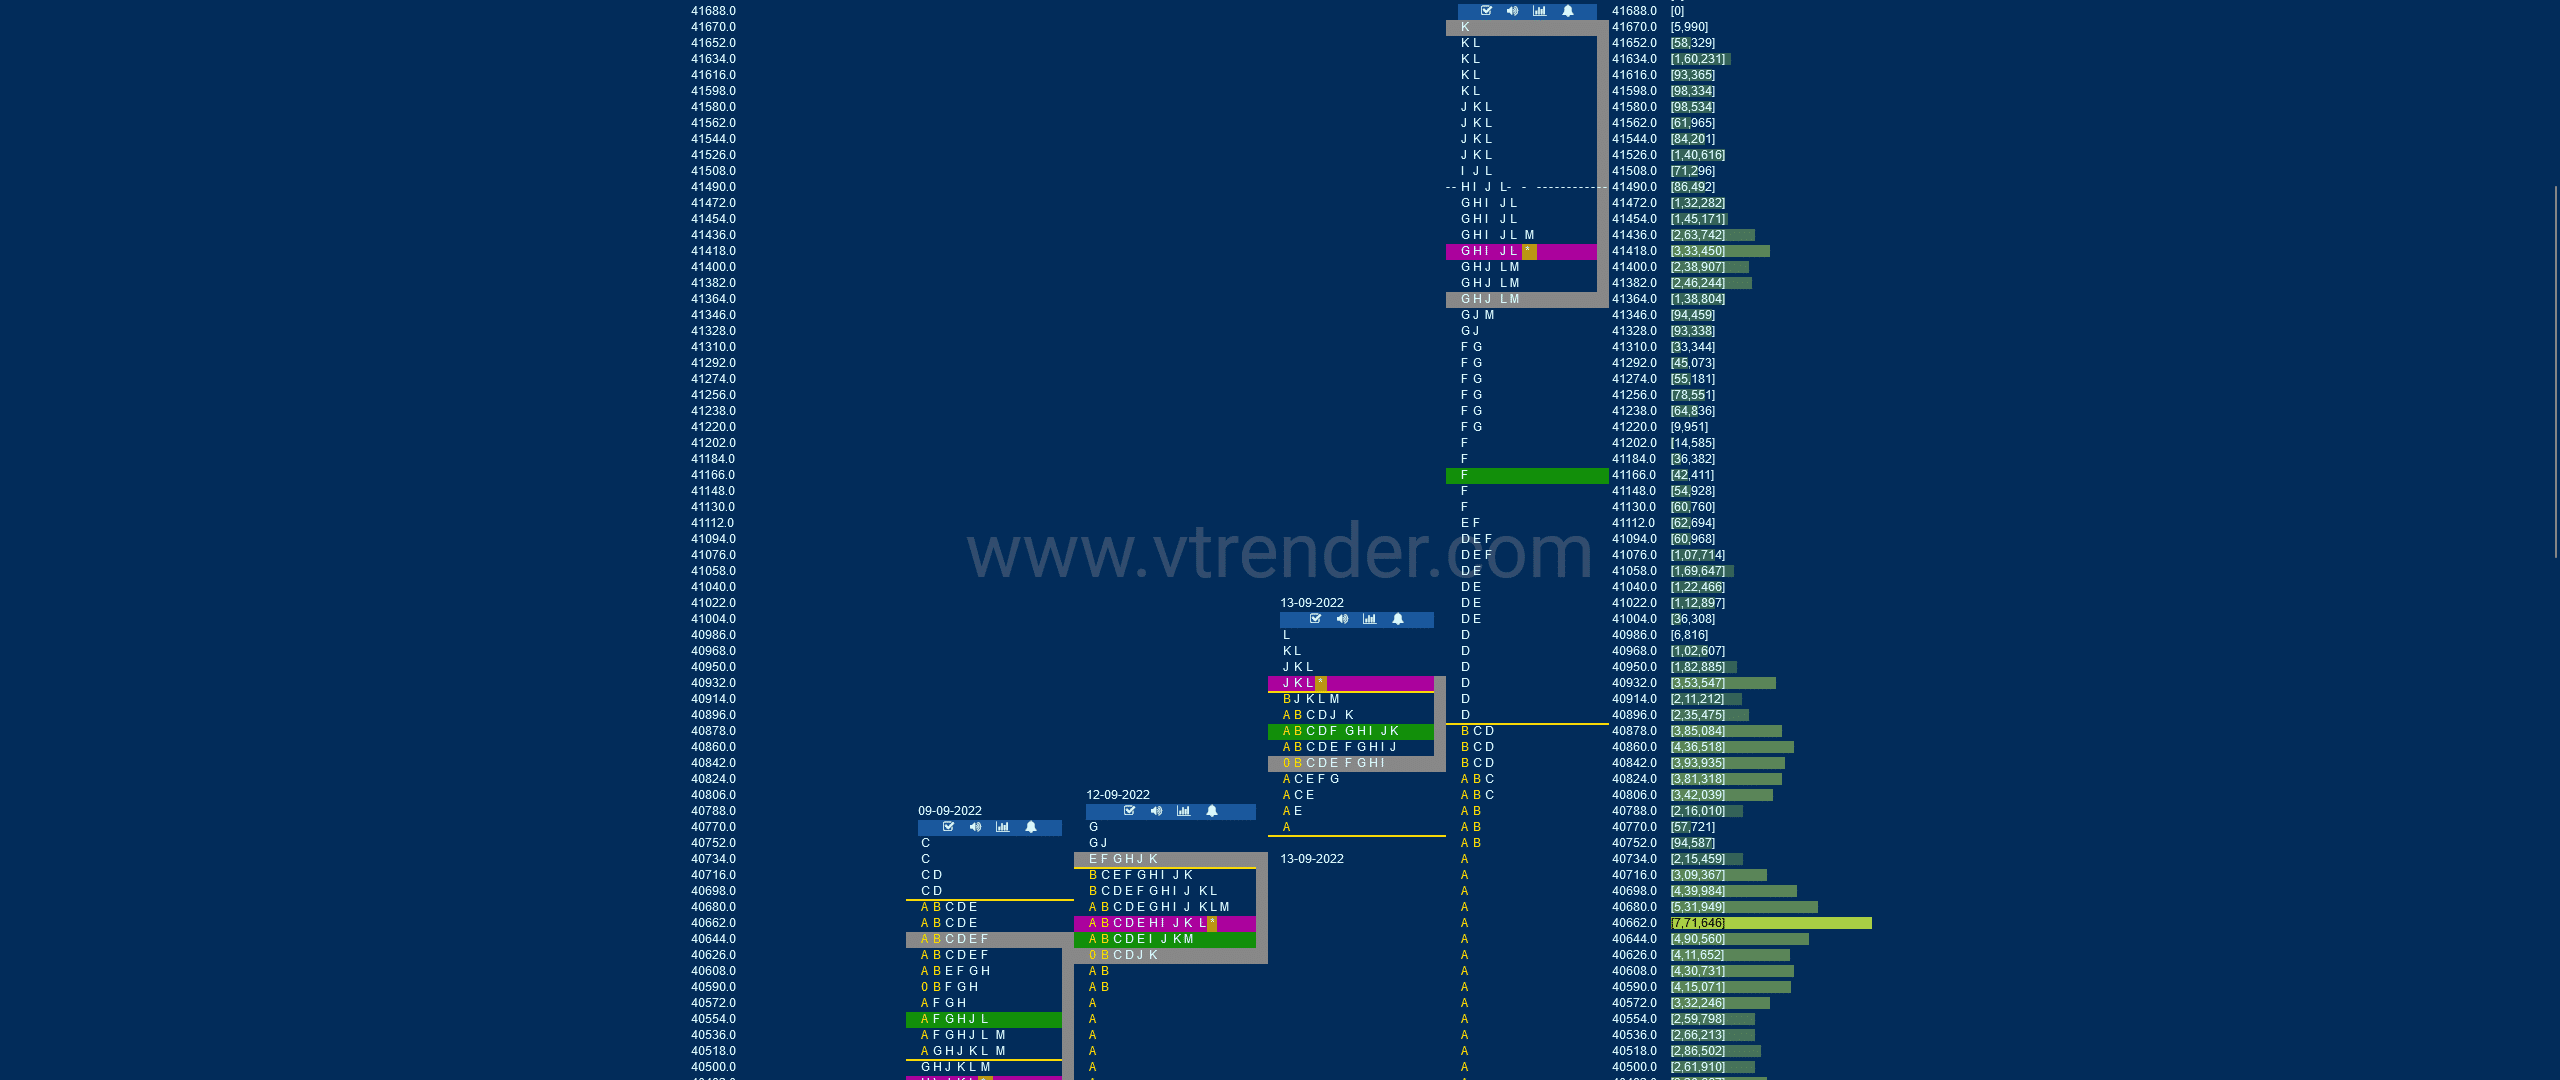 Bnf 9 Market Profile Analysis Dated 14Th Sep 2022 Banknifty Futures, Charts, Day Trading, Intraday Trading, Intraday Trading Strategies, Market Profile, Market Profile Trading Strategies, Nifty Futures, Order Flow Analysis, Support And Resistance, Technical Analysis, Trading Strategies, Volume Profile Trading